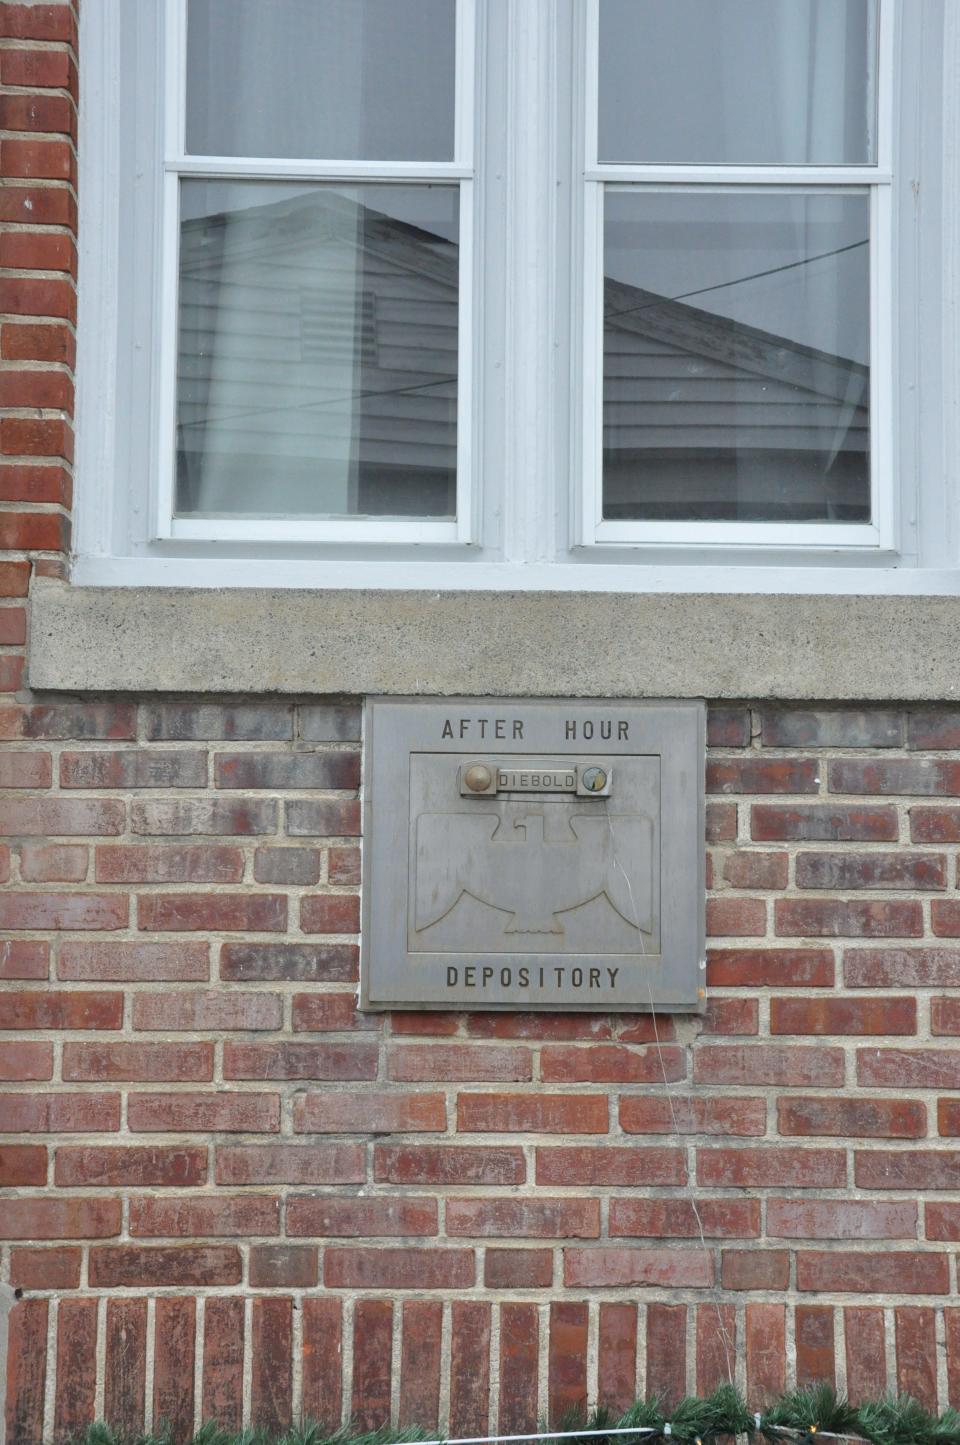 The "after hour depository" door is on the side of the former Wilmington Trust, now a home, in Townsend.